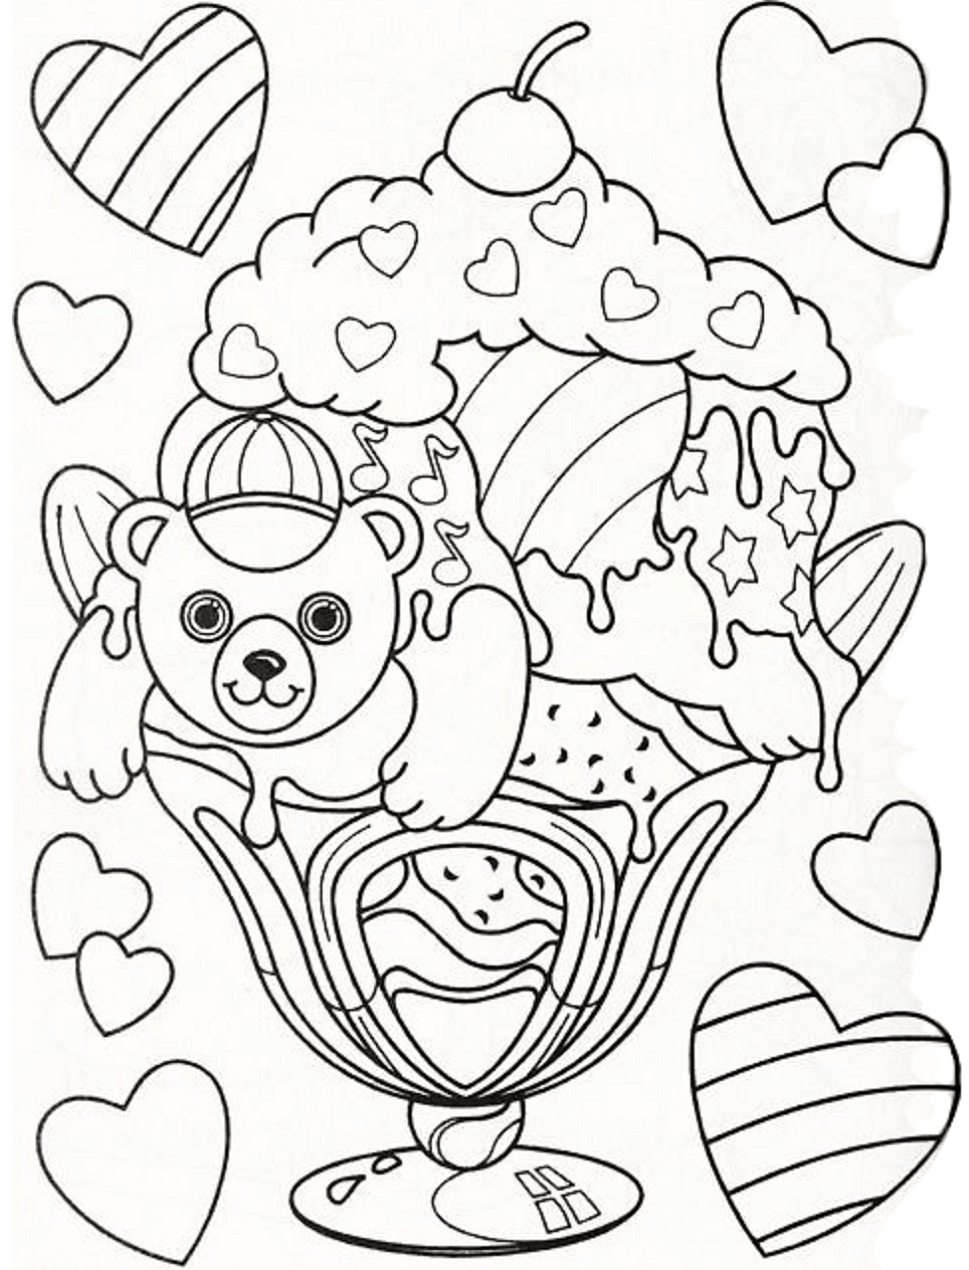 Printable Lisa Frank Coloring Pages Get Your Hands on Amazing Free